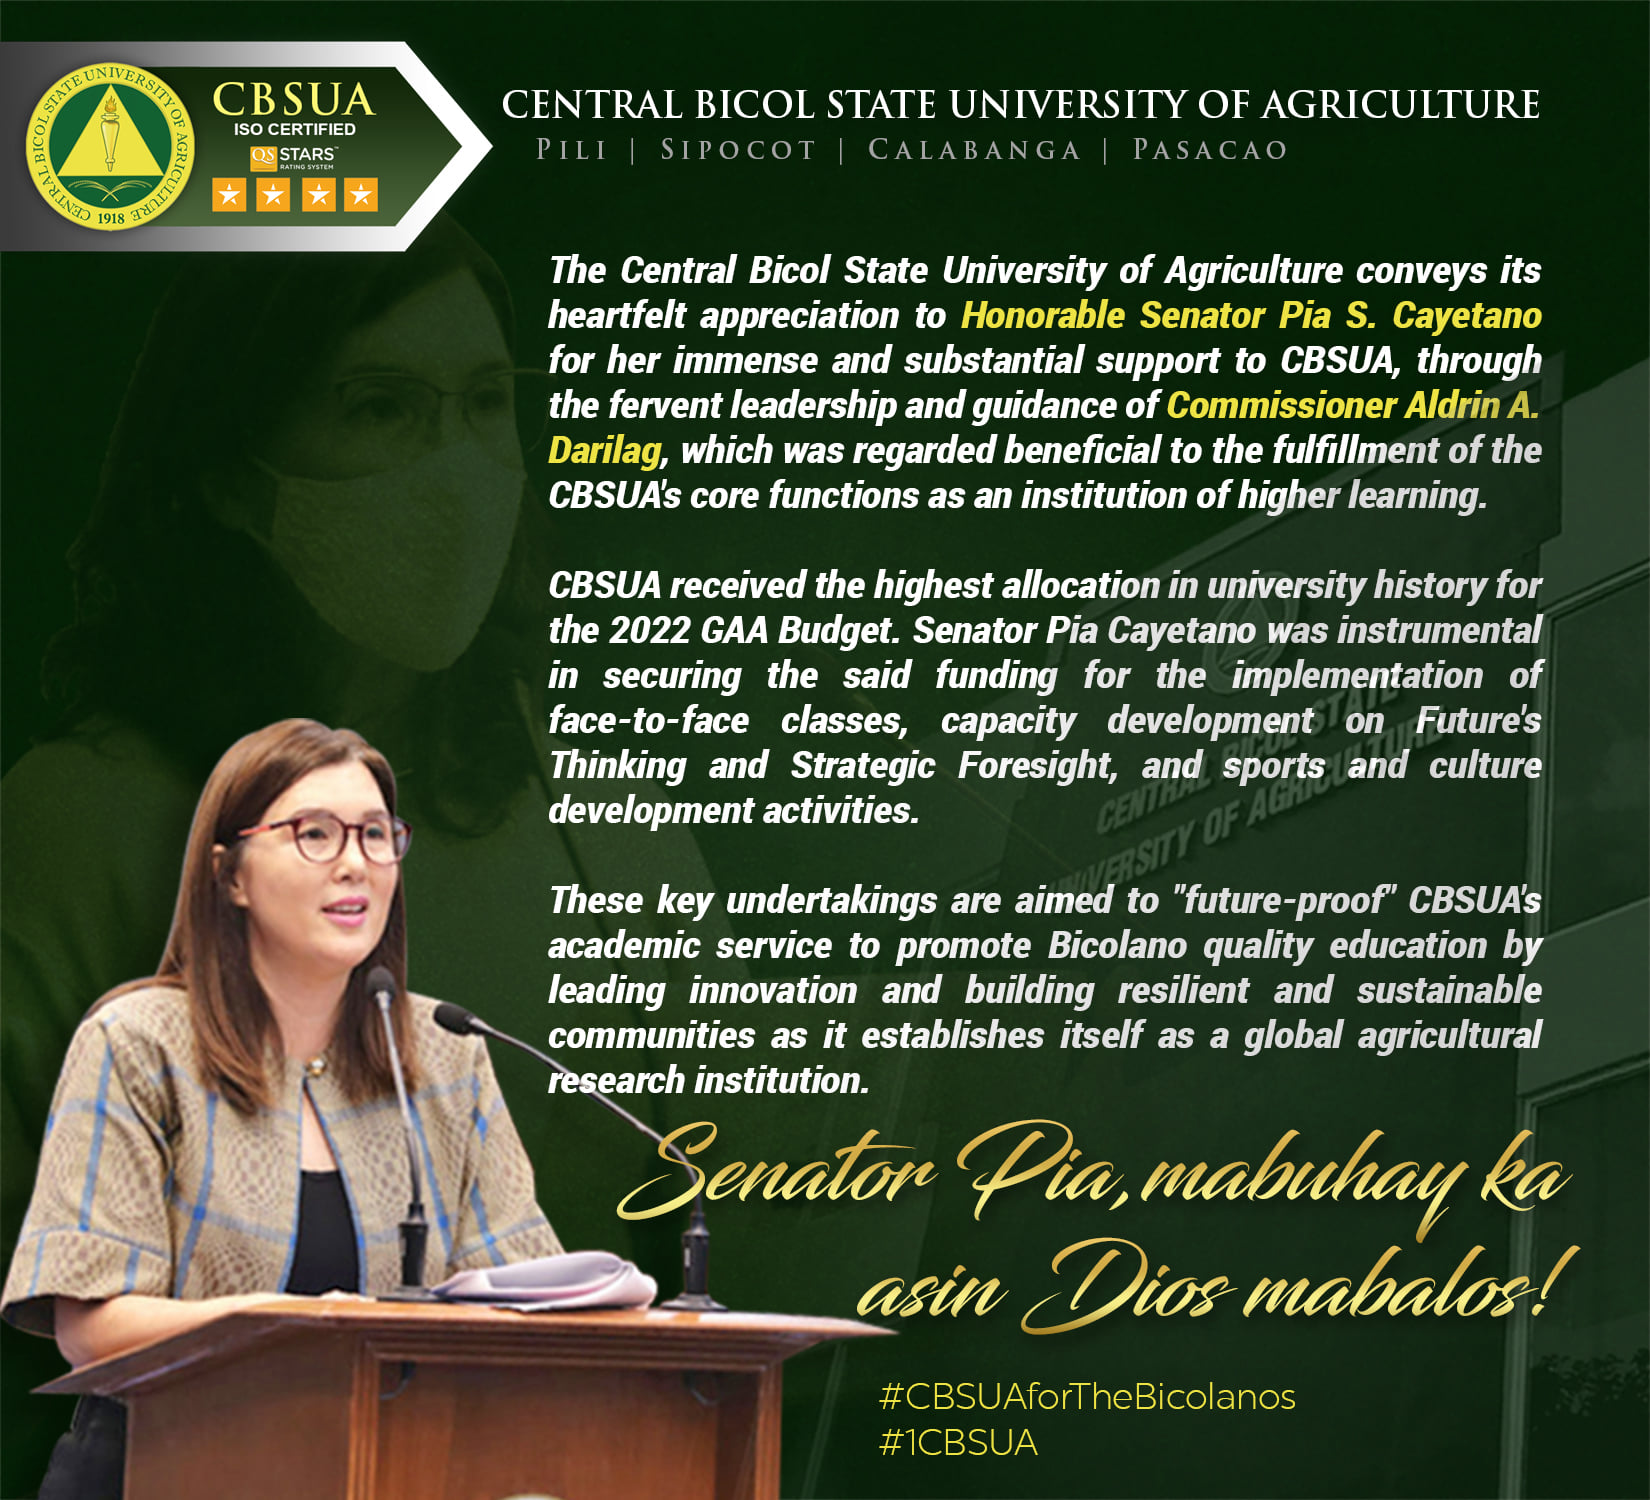 The Central Bicol State University of Agriculture conveys its heartfelt appreciation to Honorable Senator Pia S. Cayetano